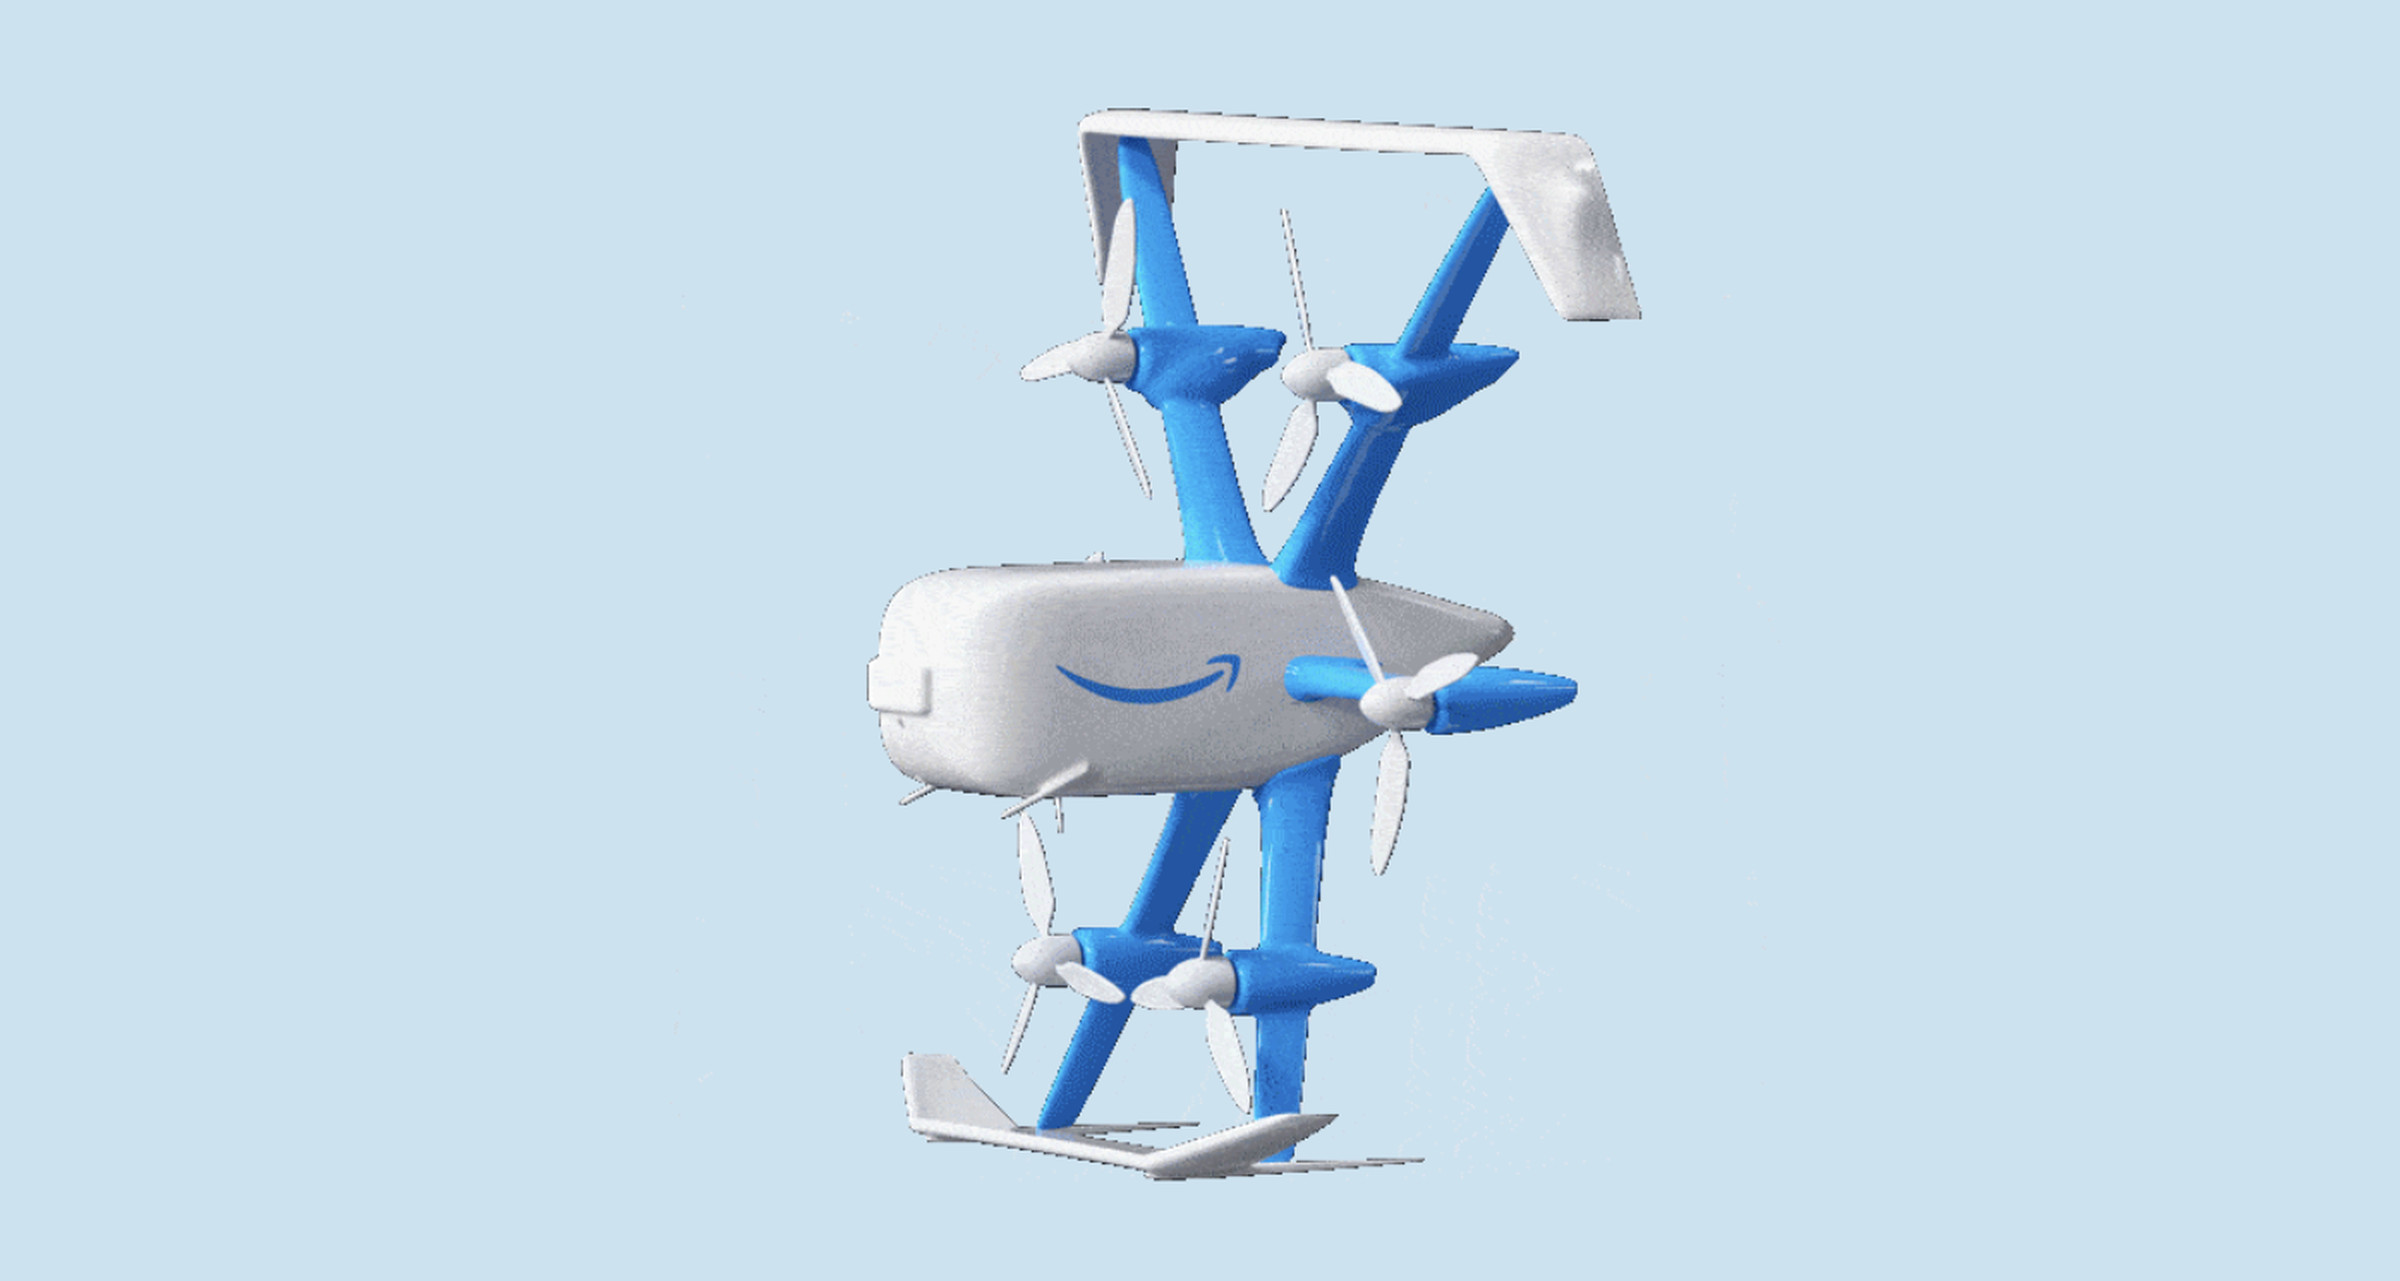 Amazon releases photos of its new Prime Air MK30 delivery drone.